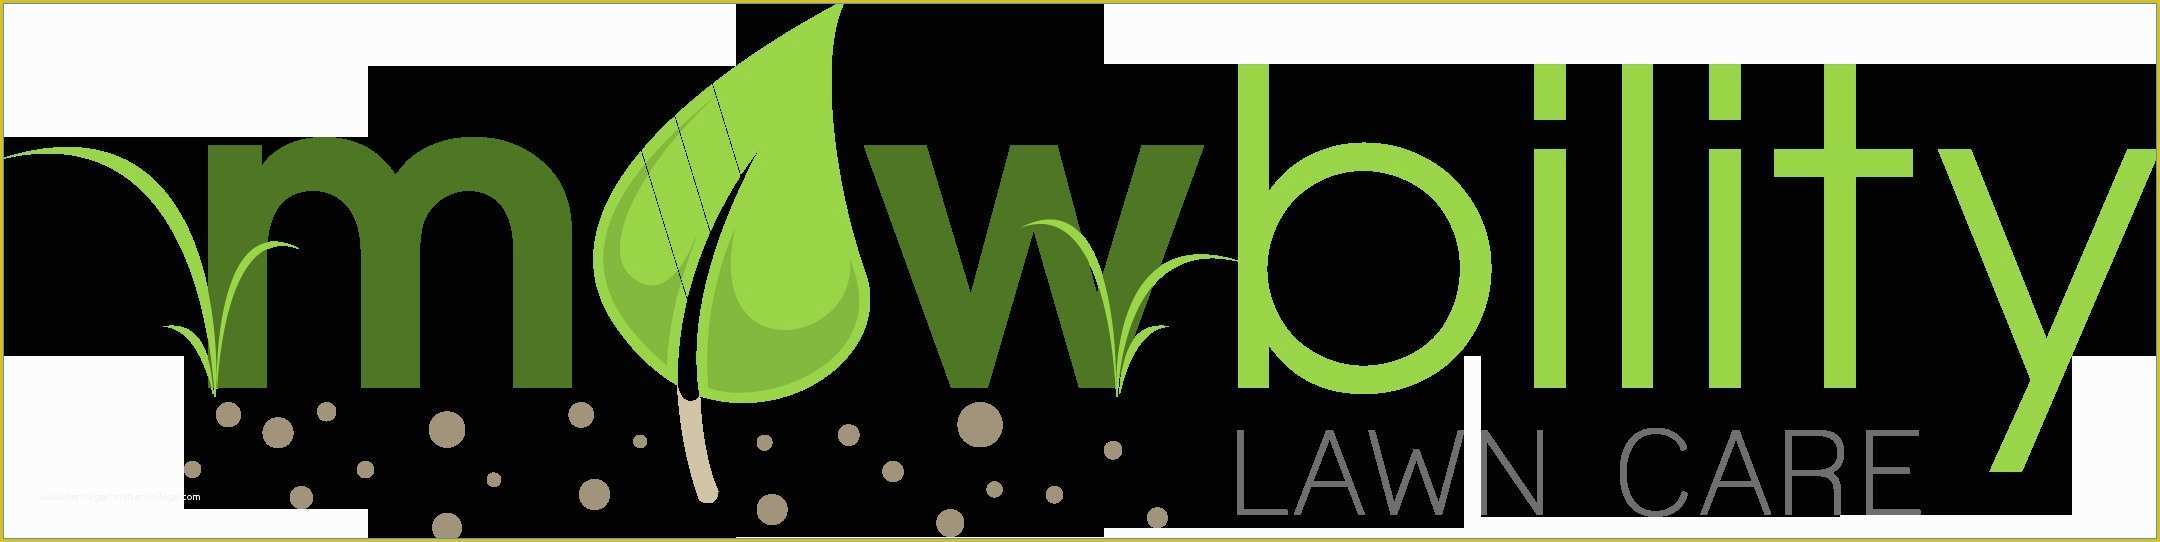 Free Lawn Care Logo Templates Of 100 Get Free Lawn Care Logos Lawn Care Designs Lawn Care